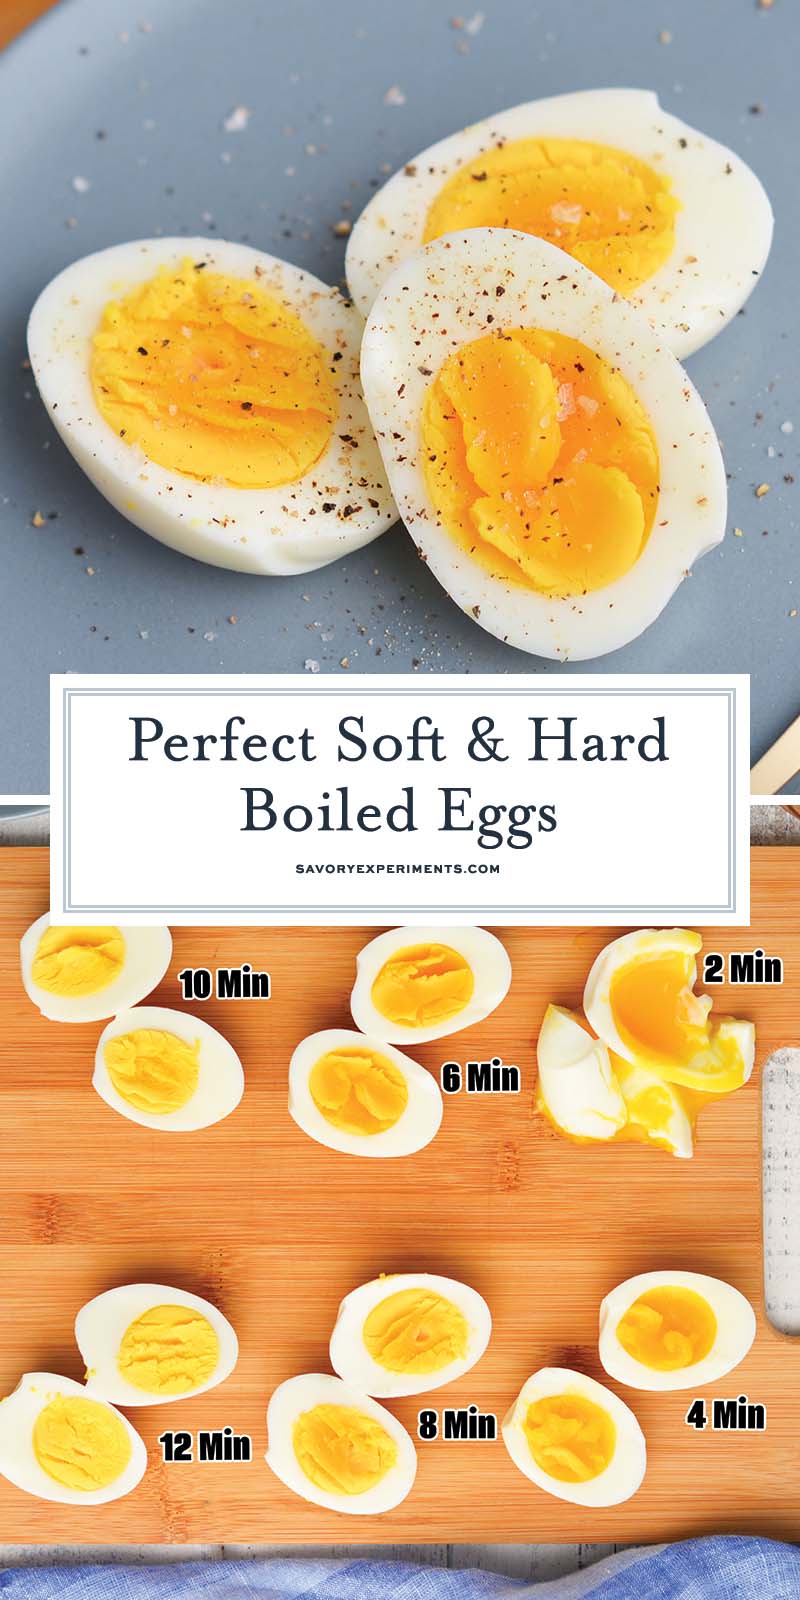 https://www.savoryexperiments.com/wp-content/uploads/2023/03/perfect-hard-boiled-eggs-PIN-1.jpg